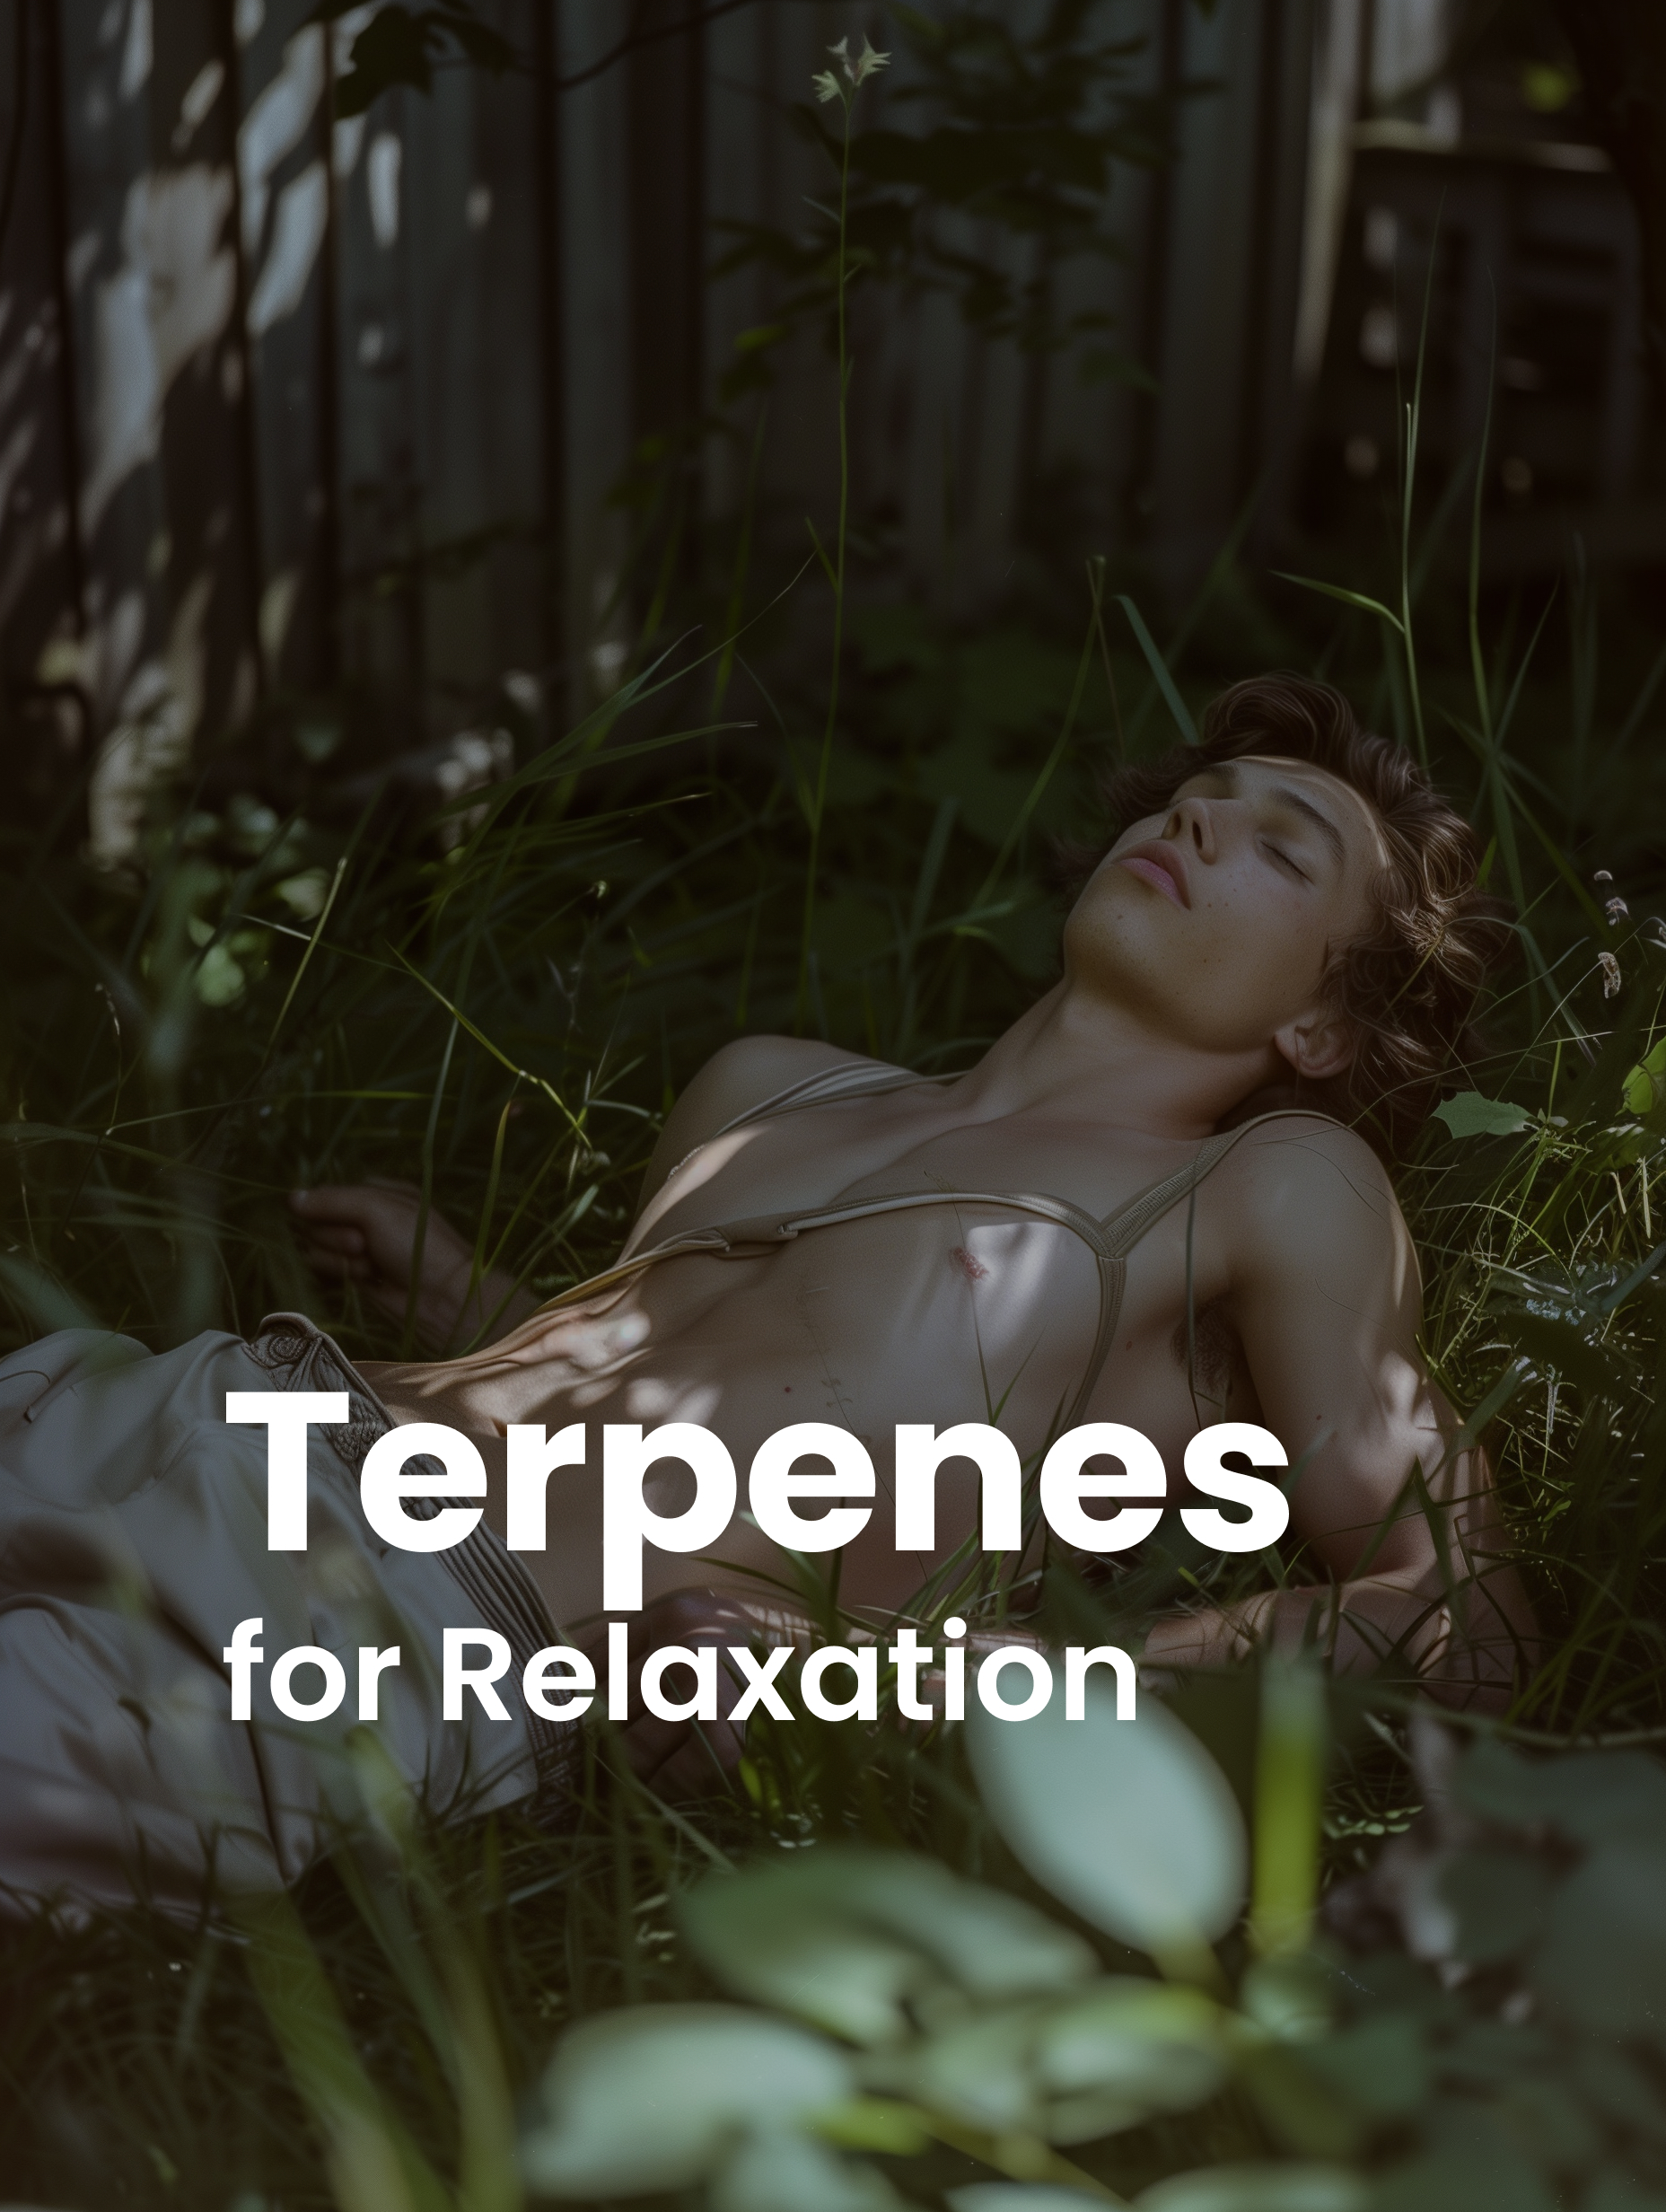 Terpenes for Relaxation